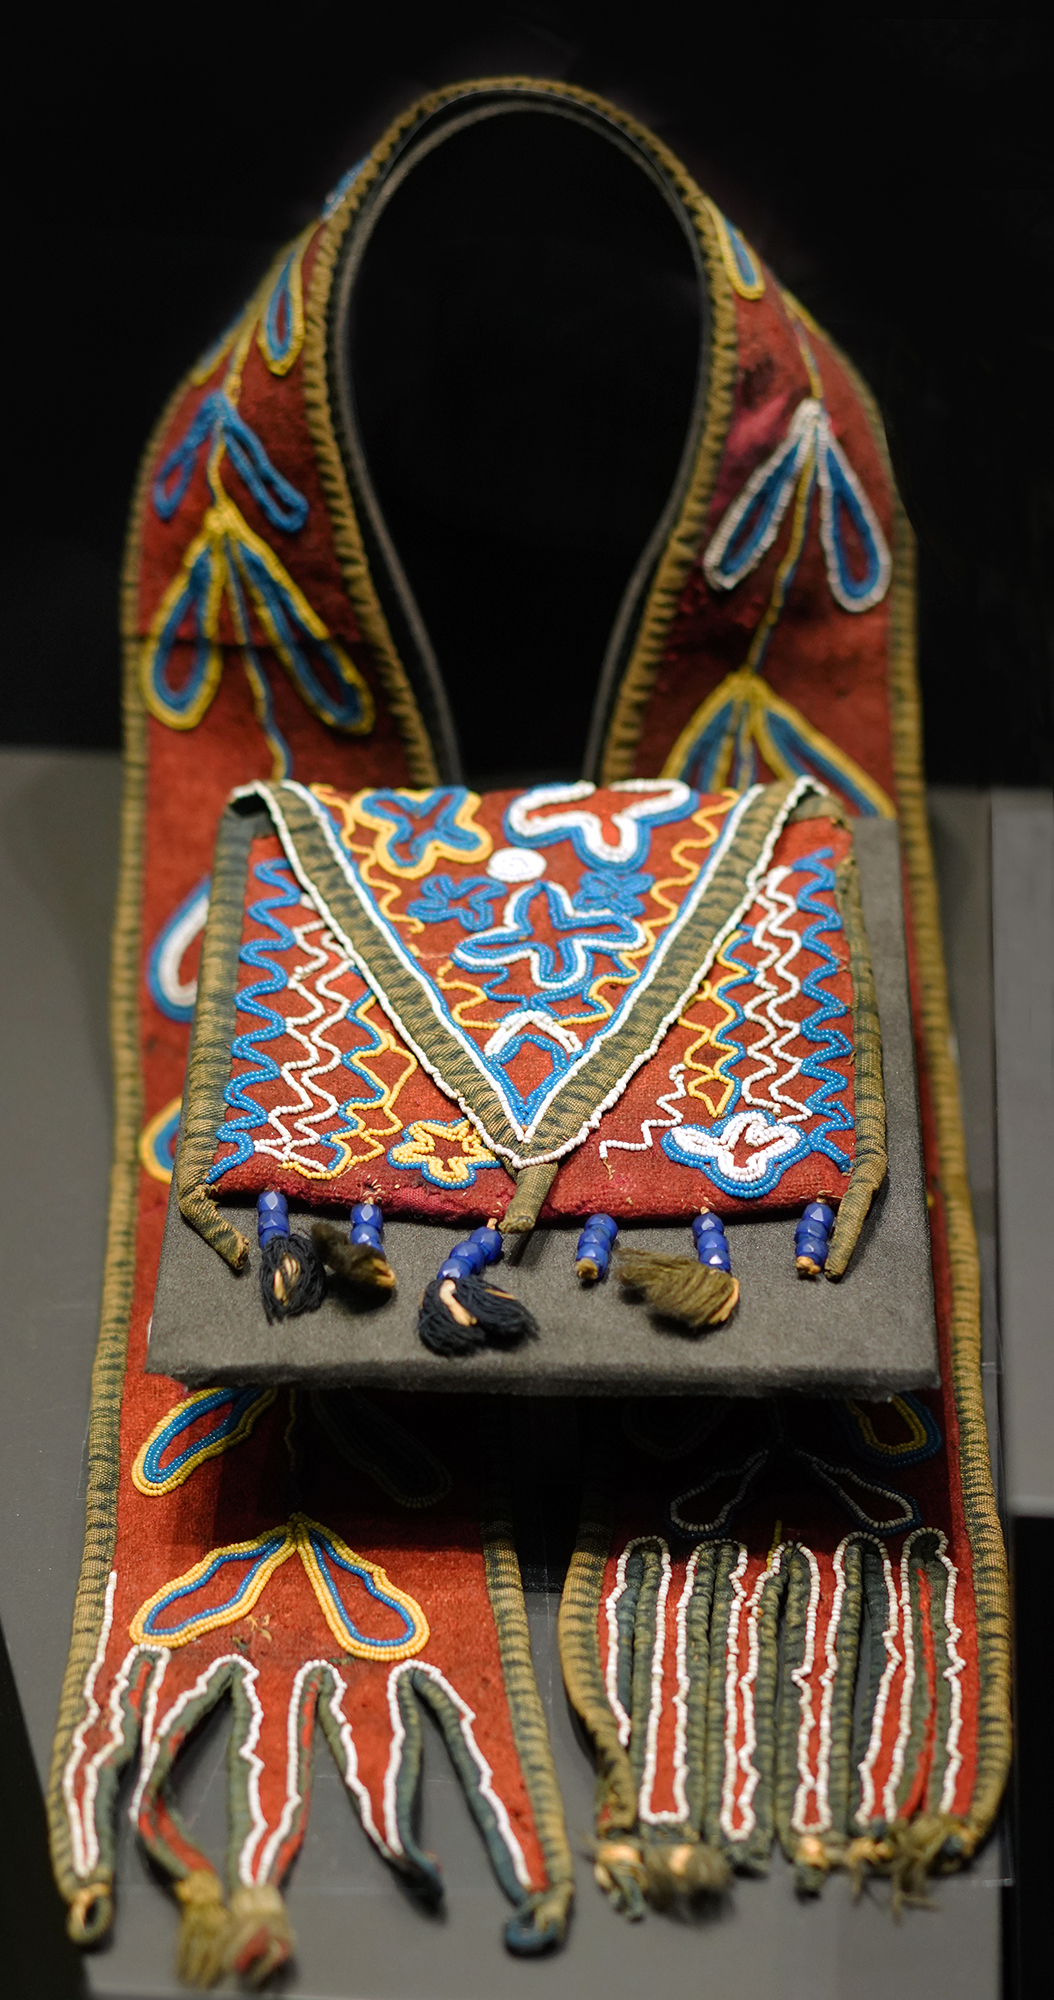 Bandolier bag, likely Delaware, wool, glass beads, cotton, fringe c. 1860 (The American Civil War Museum, photo: Steven Zucker, CC BY-NC-SA 2.0)